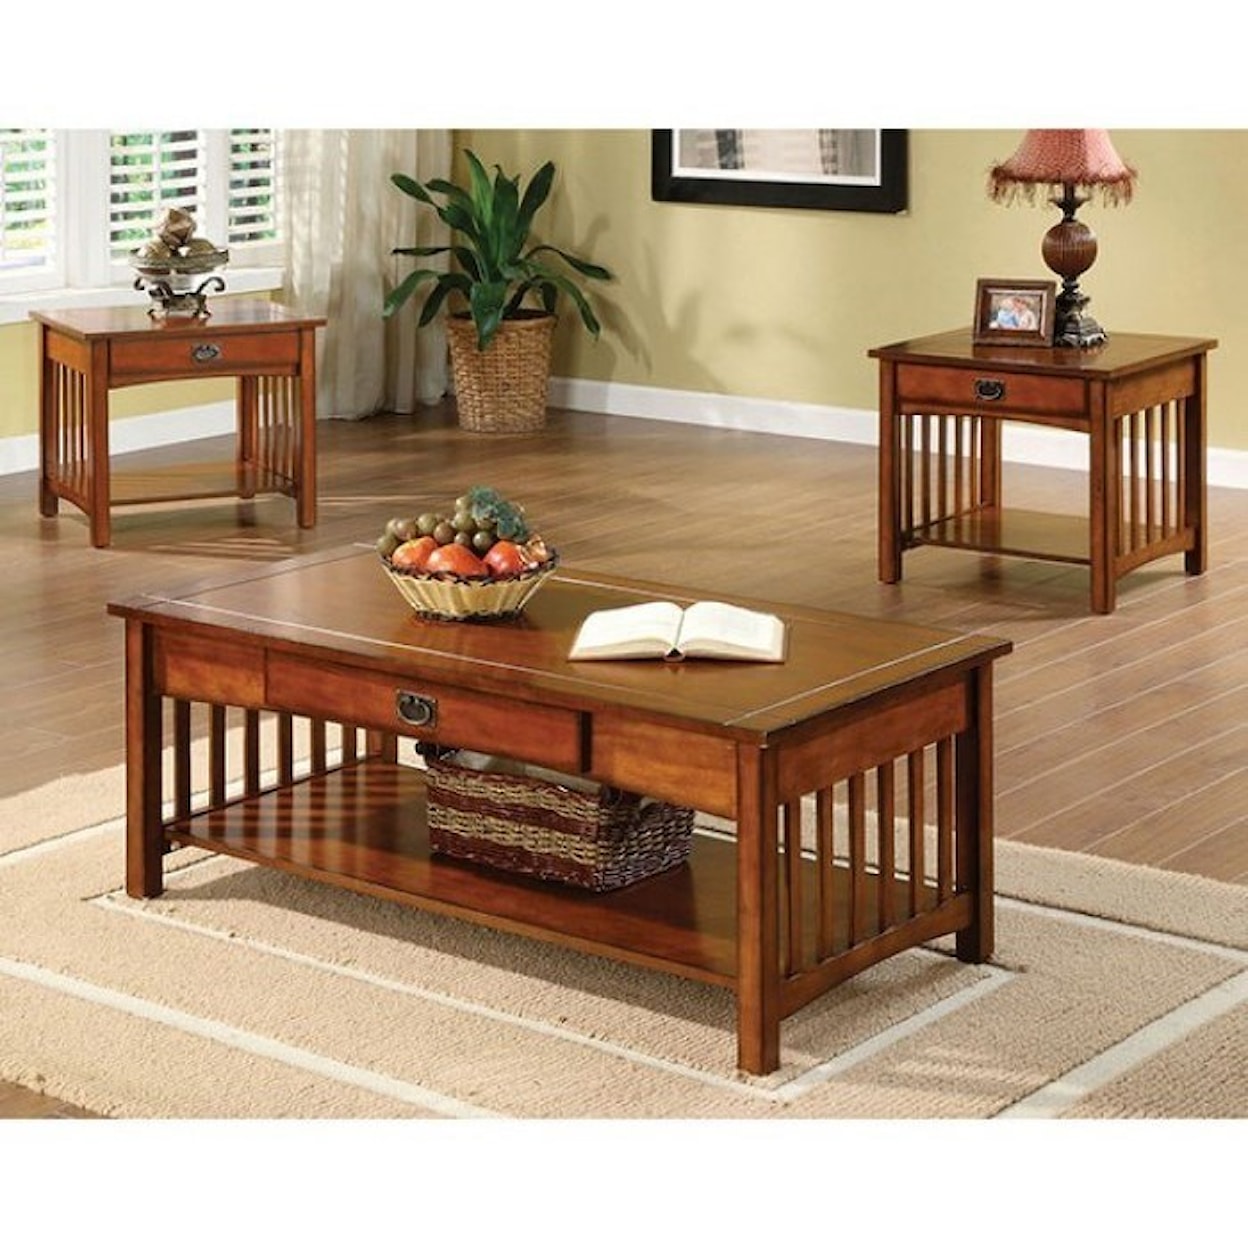 Furniture of America Seville 3 Pc. Table Set